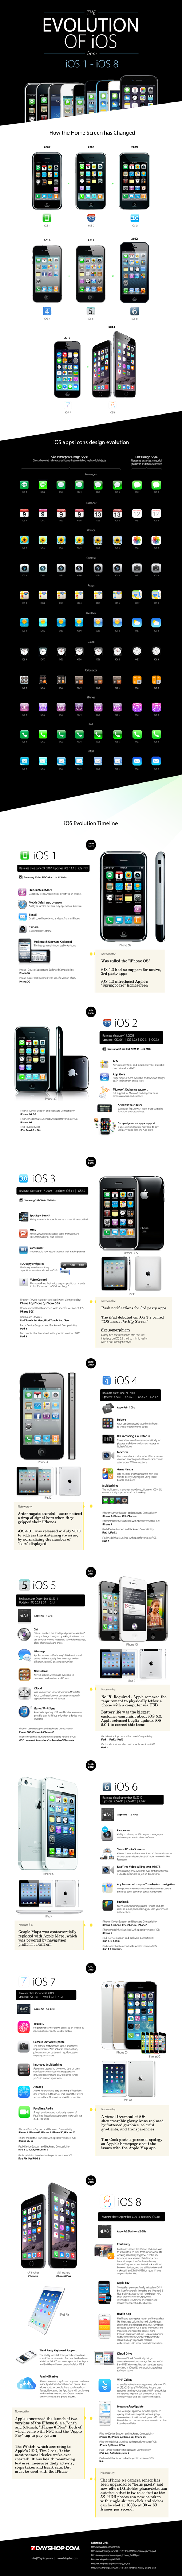 The Evolution of iOS from iOS 1 - iOS 8 infographic